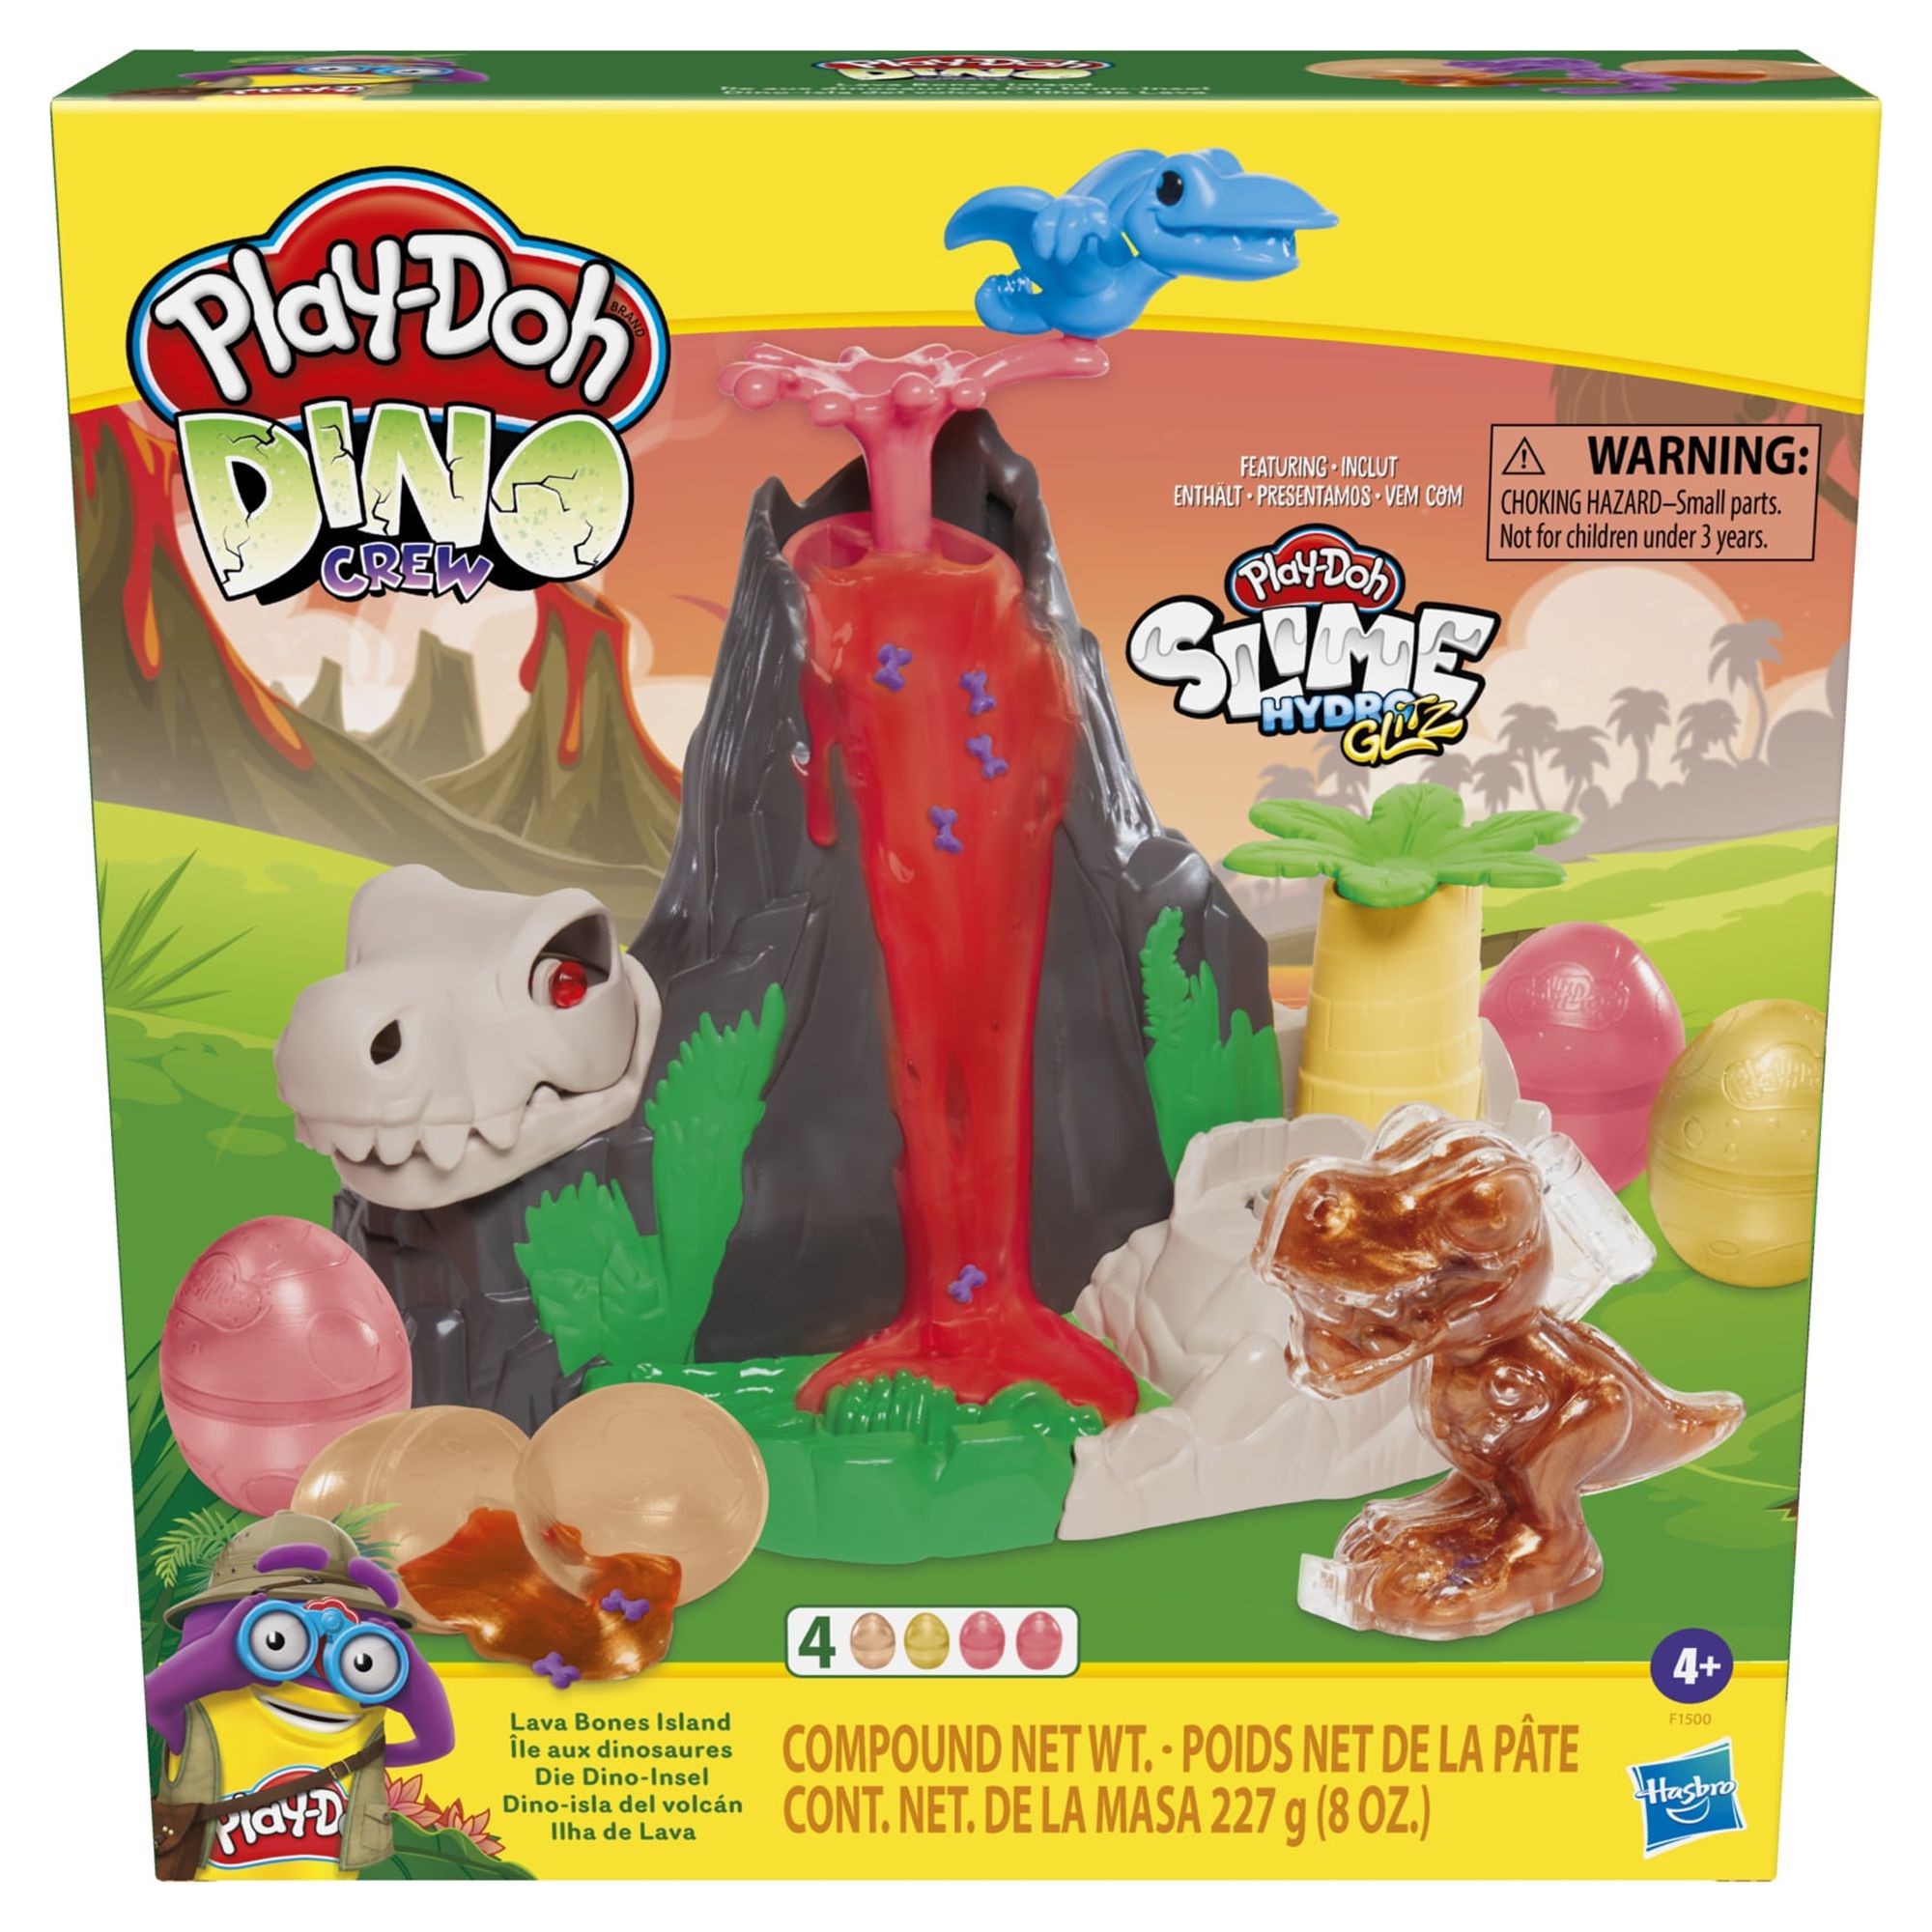 Play-Doh Slime Dino Crew Lava Bones Island Volcano Playset for Kids 4 Years and Up, Non-Toxic - image 3 of 14